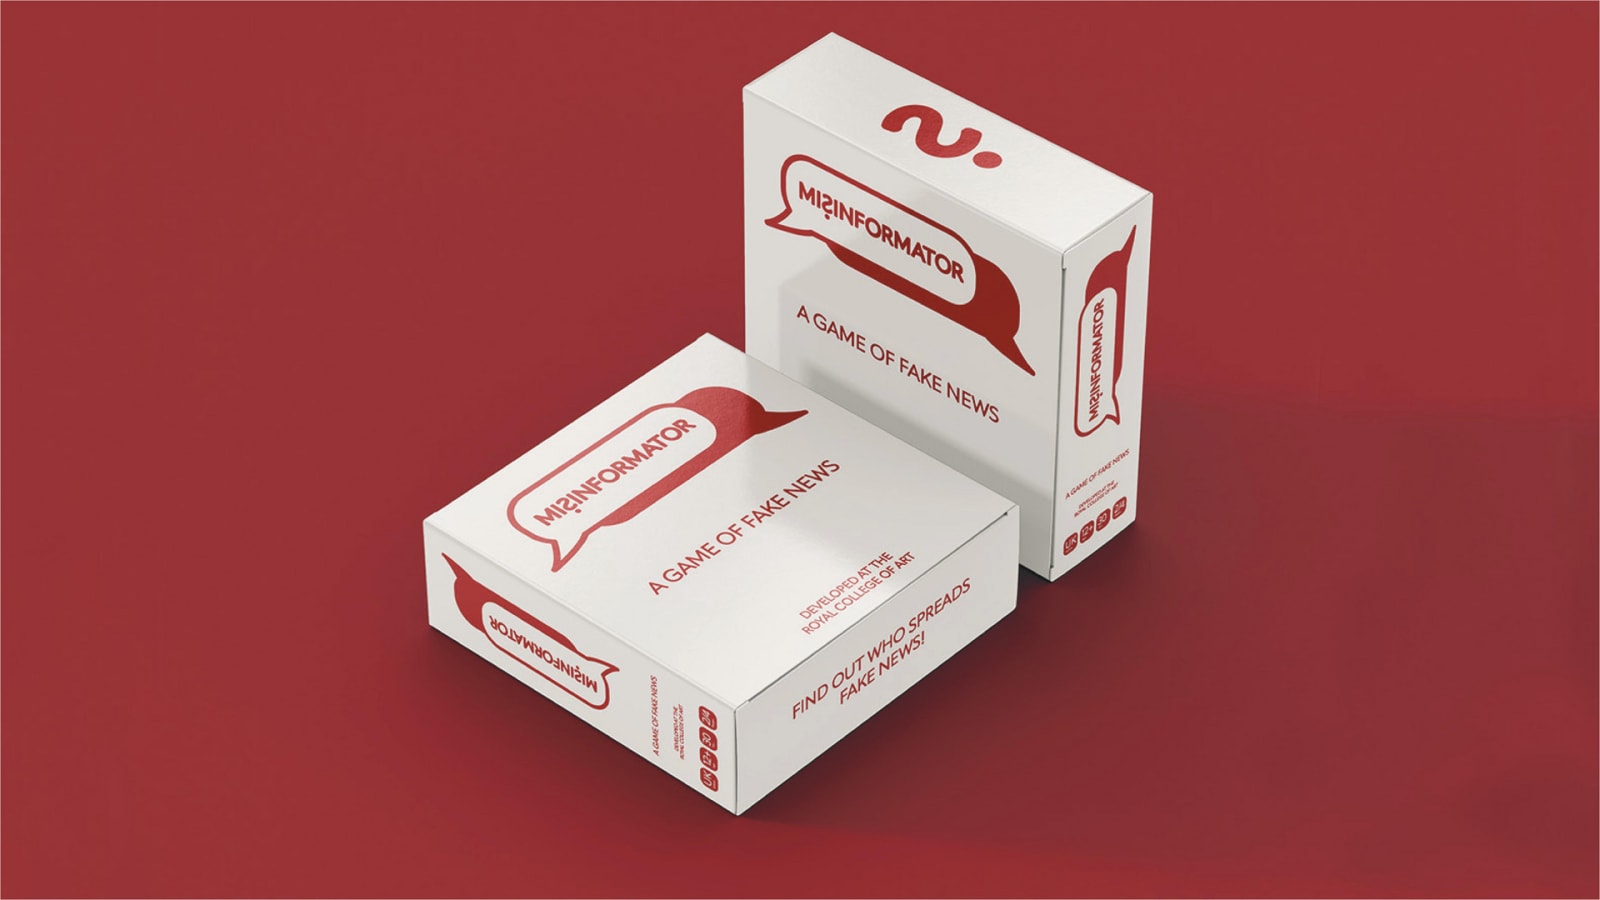 Digital mockup showing the packaging of the card game. White square box with graphics on it. 